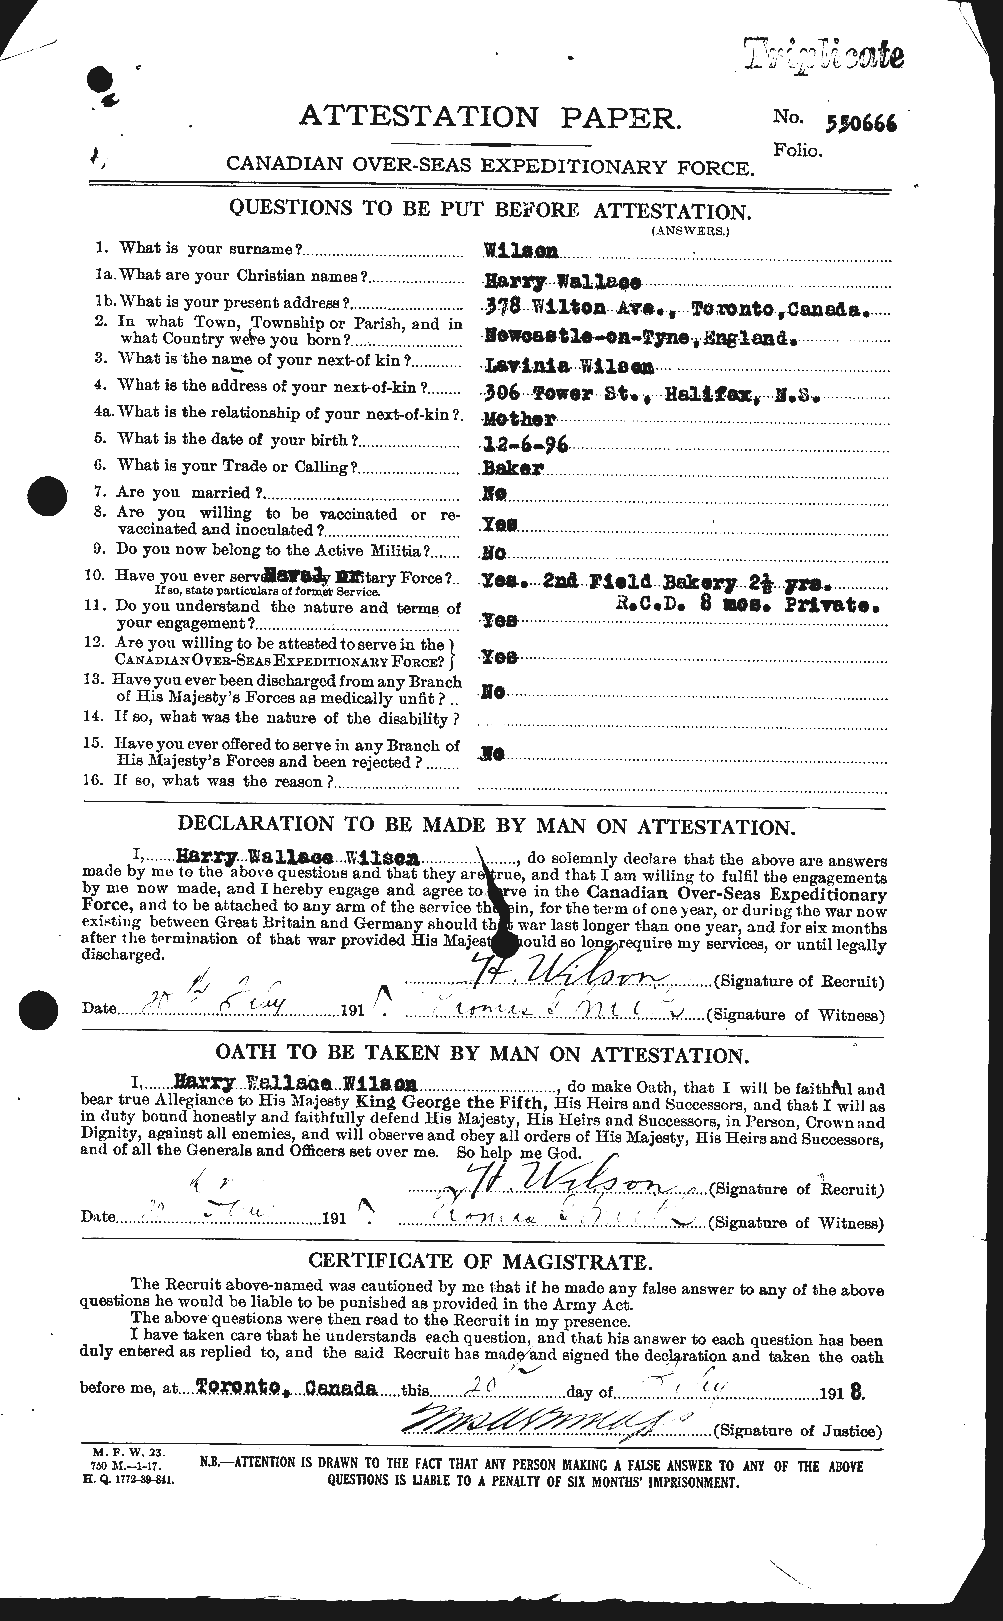 Personnel Records of the First World War - CEF 679476a